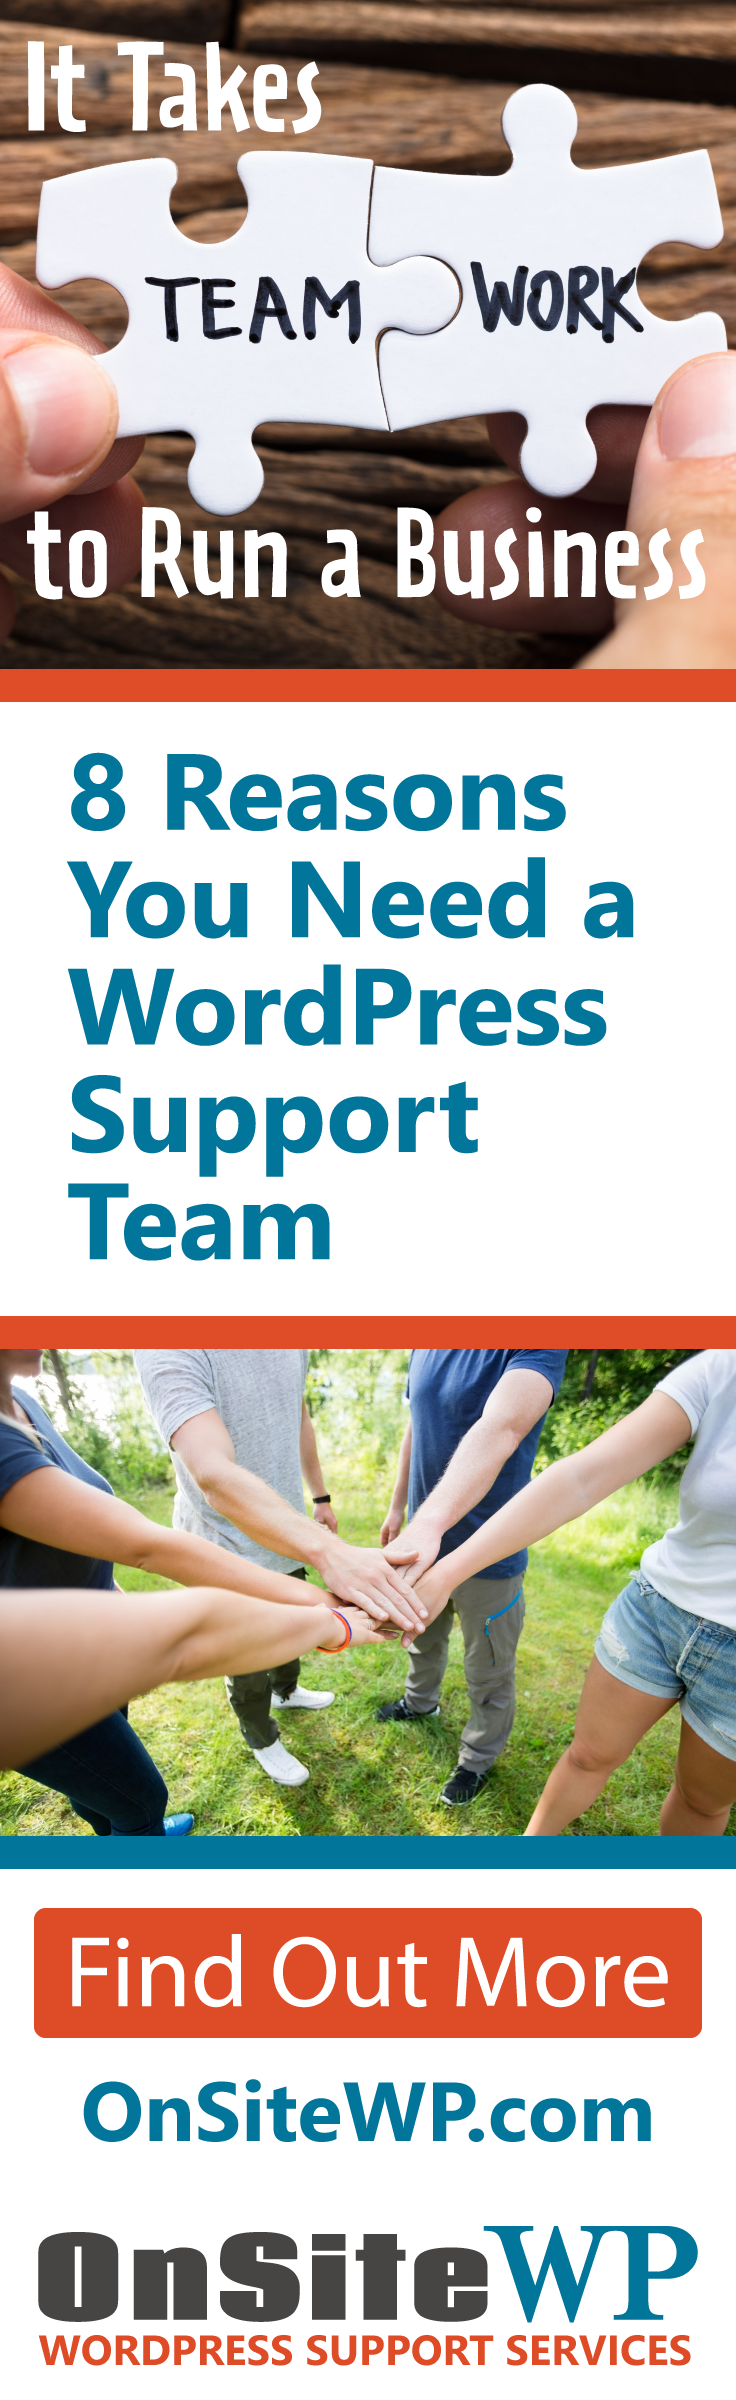 8 Reasons you Need a WordPress Support Team